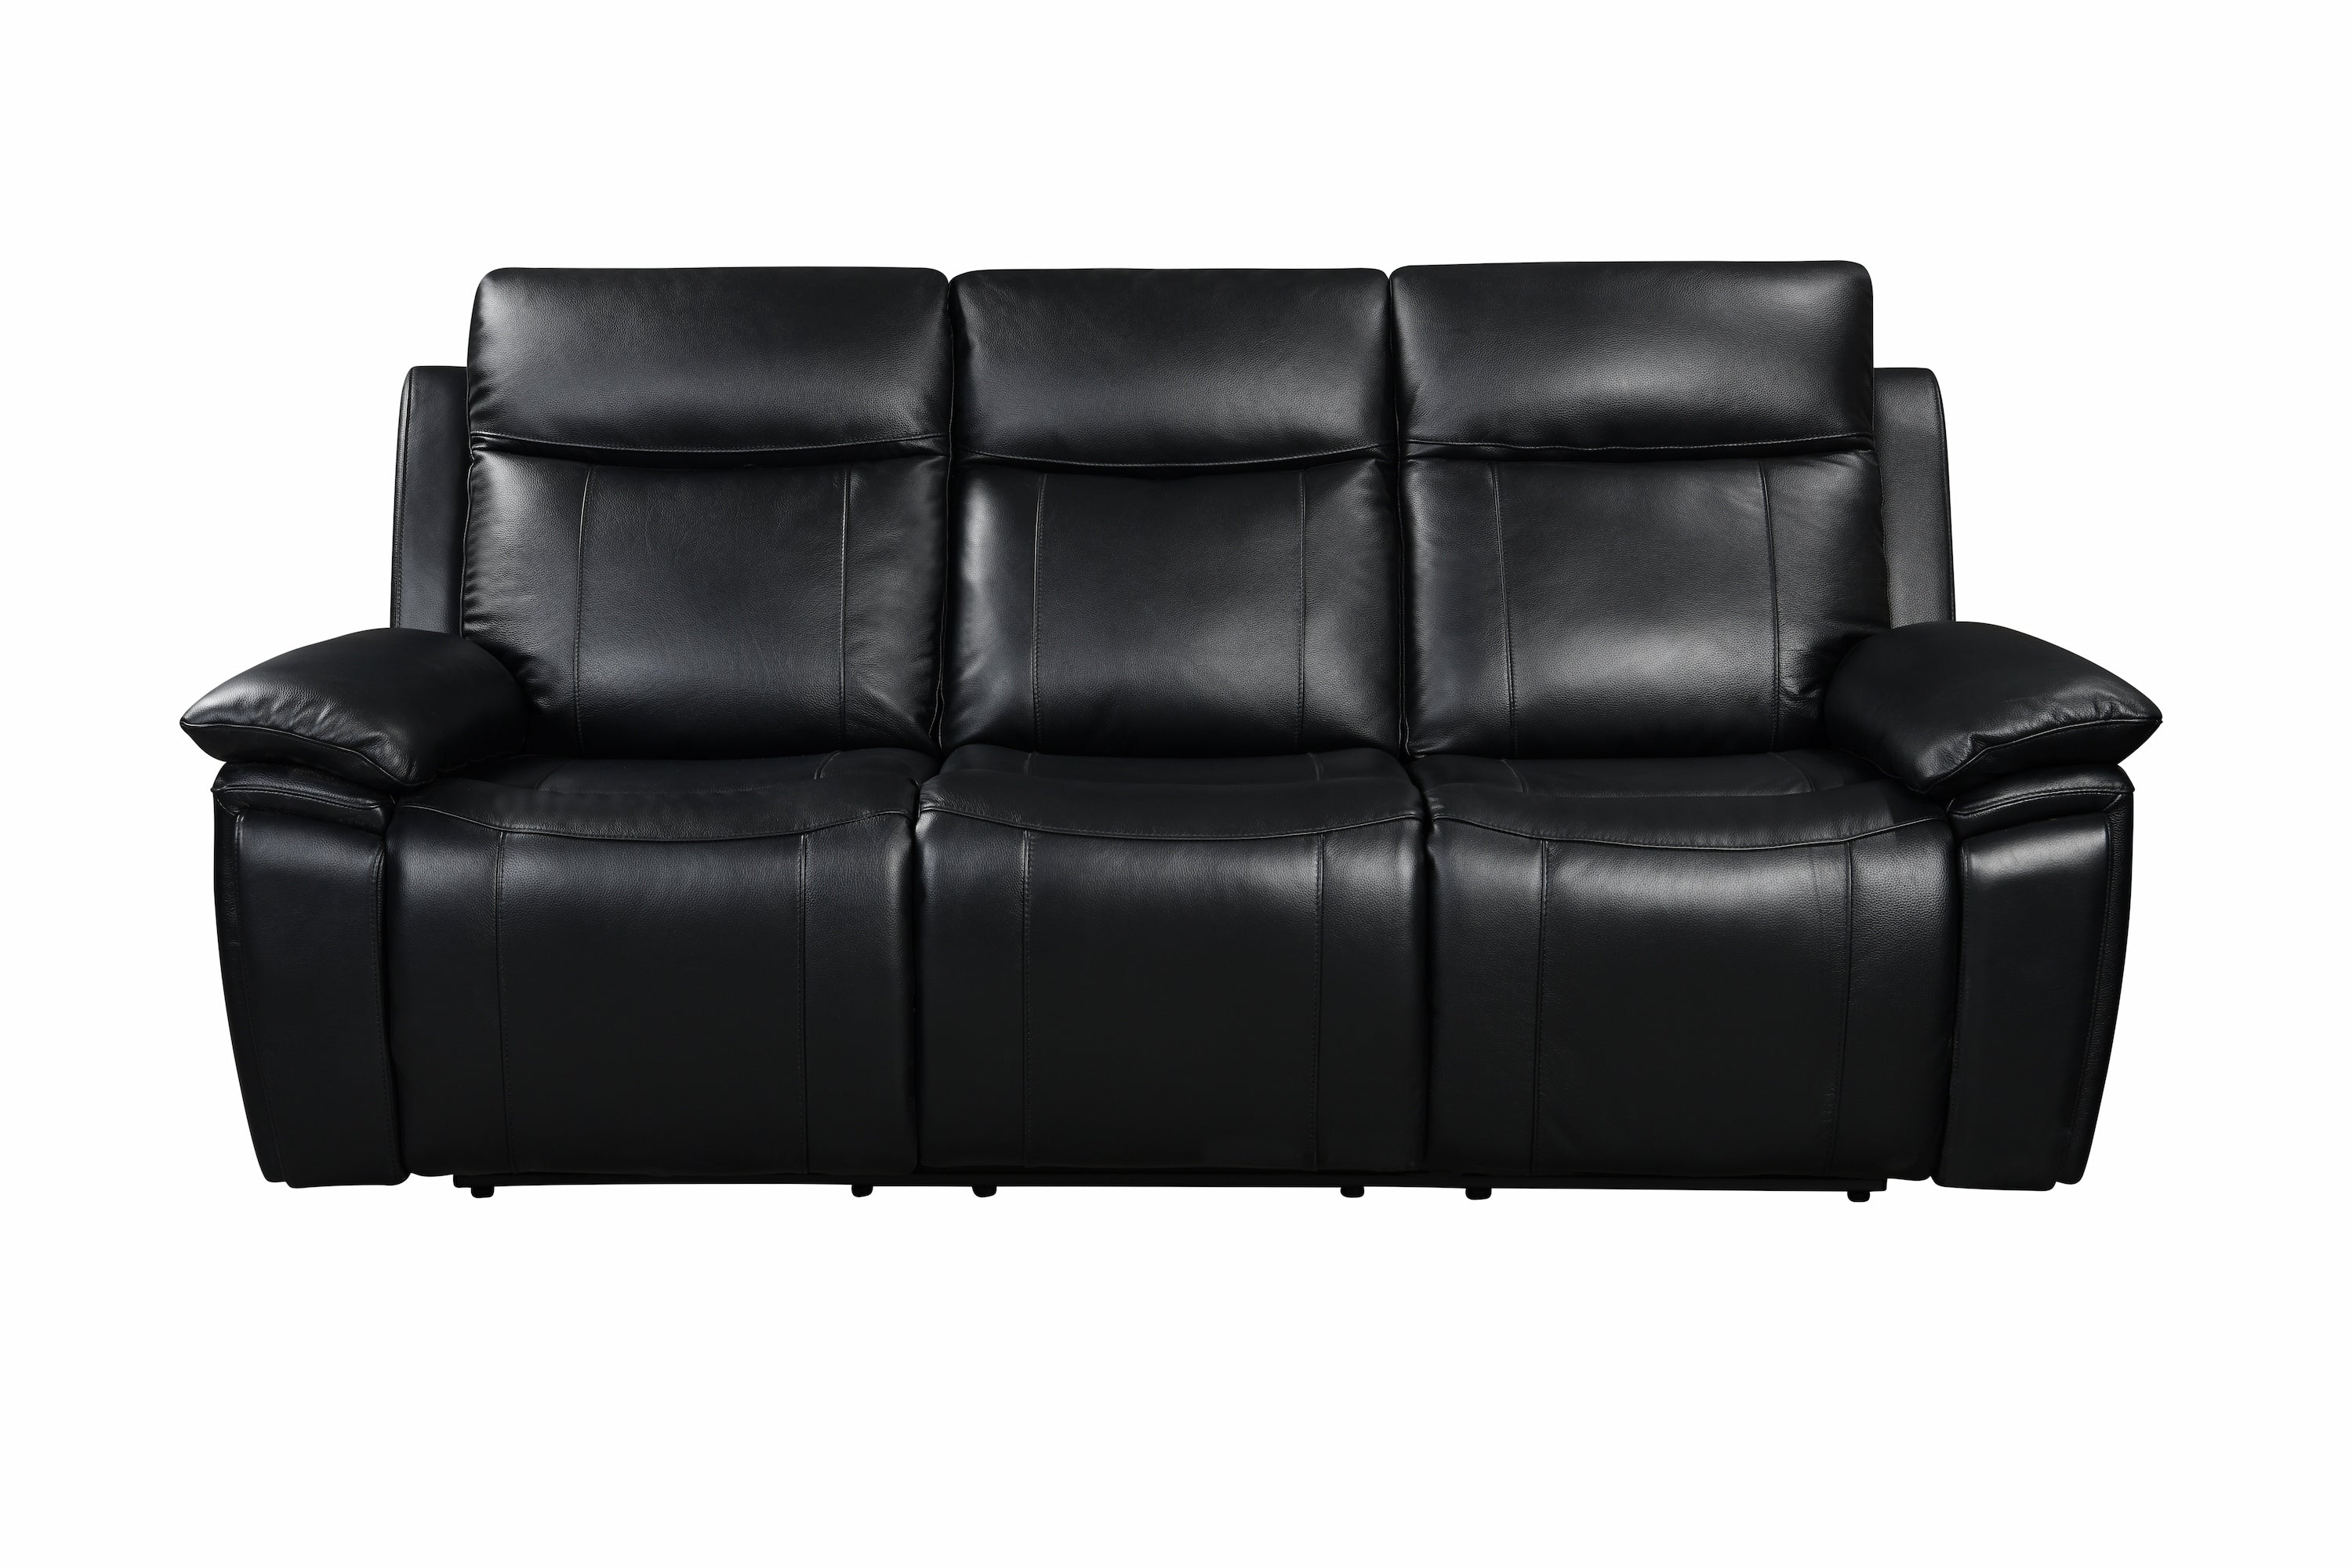 Savio 3 Seater Leather Sofa with Power Recliners, Power Headrests and cupholders